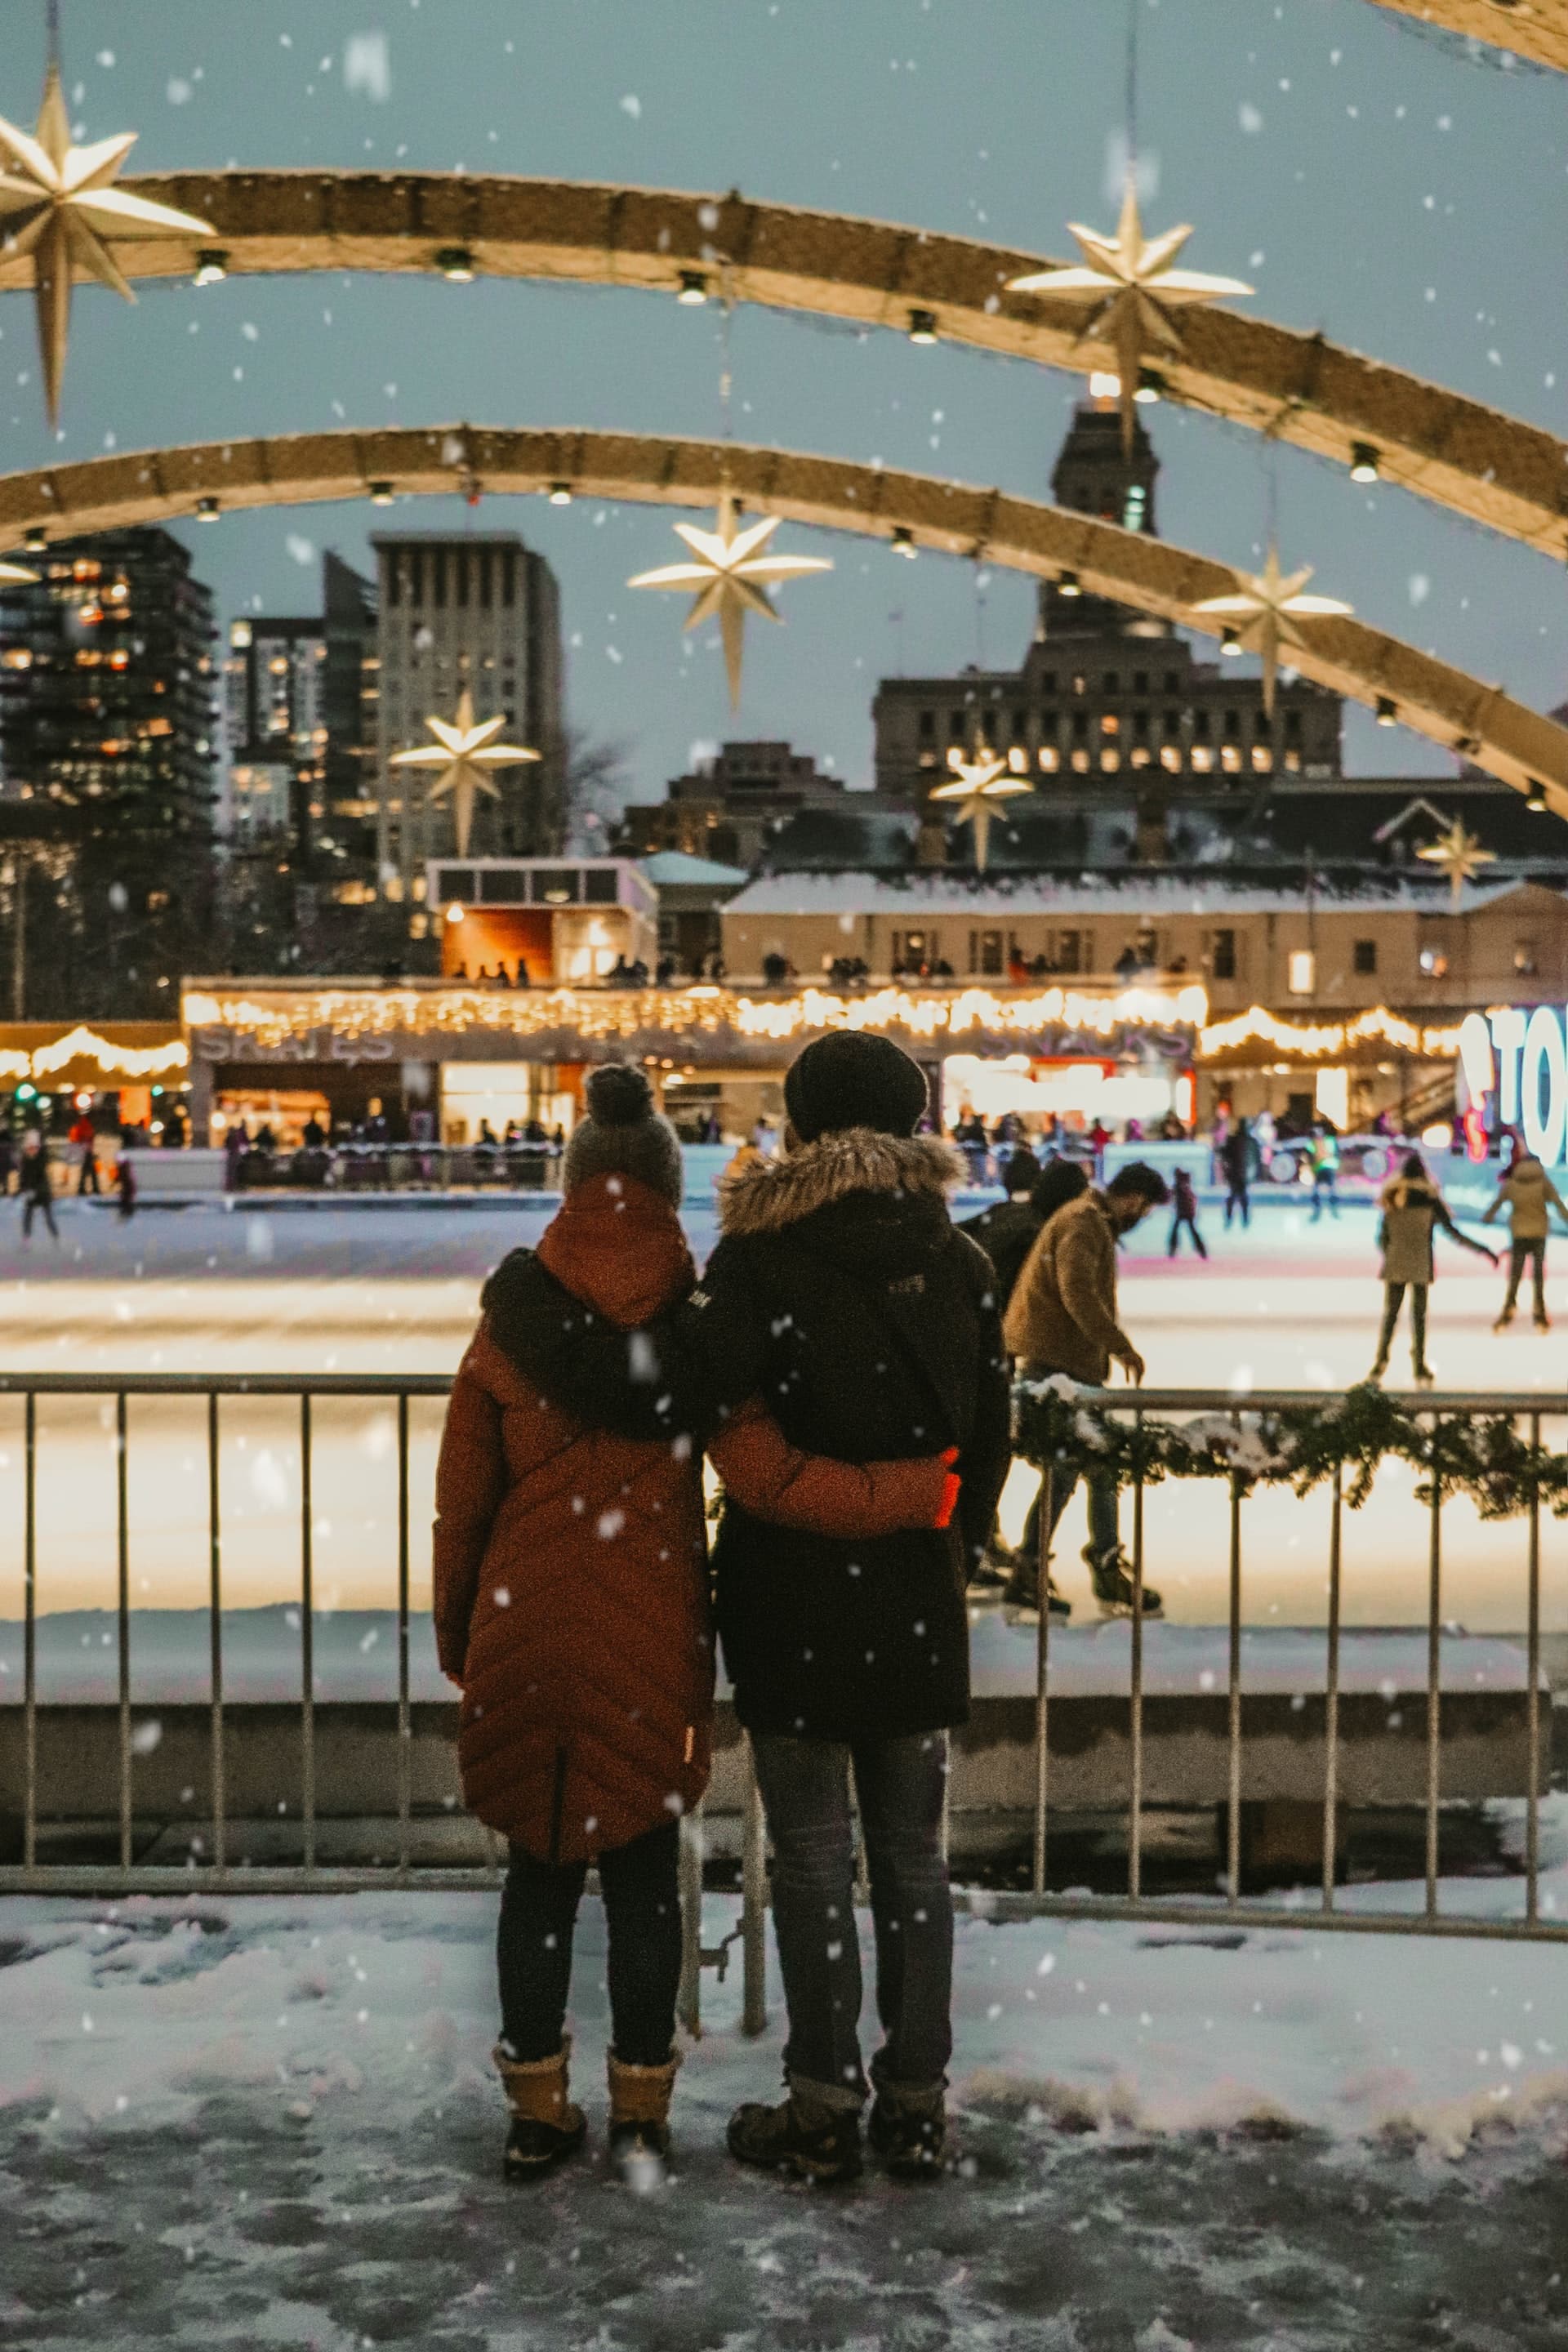 Things to do in the winter in Toronto - ice skating at Nathan Phillips Square